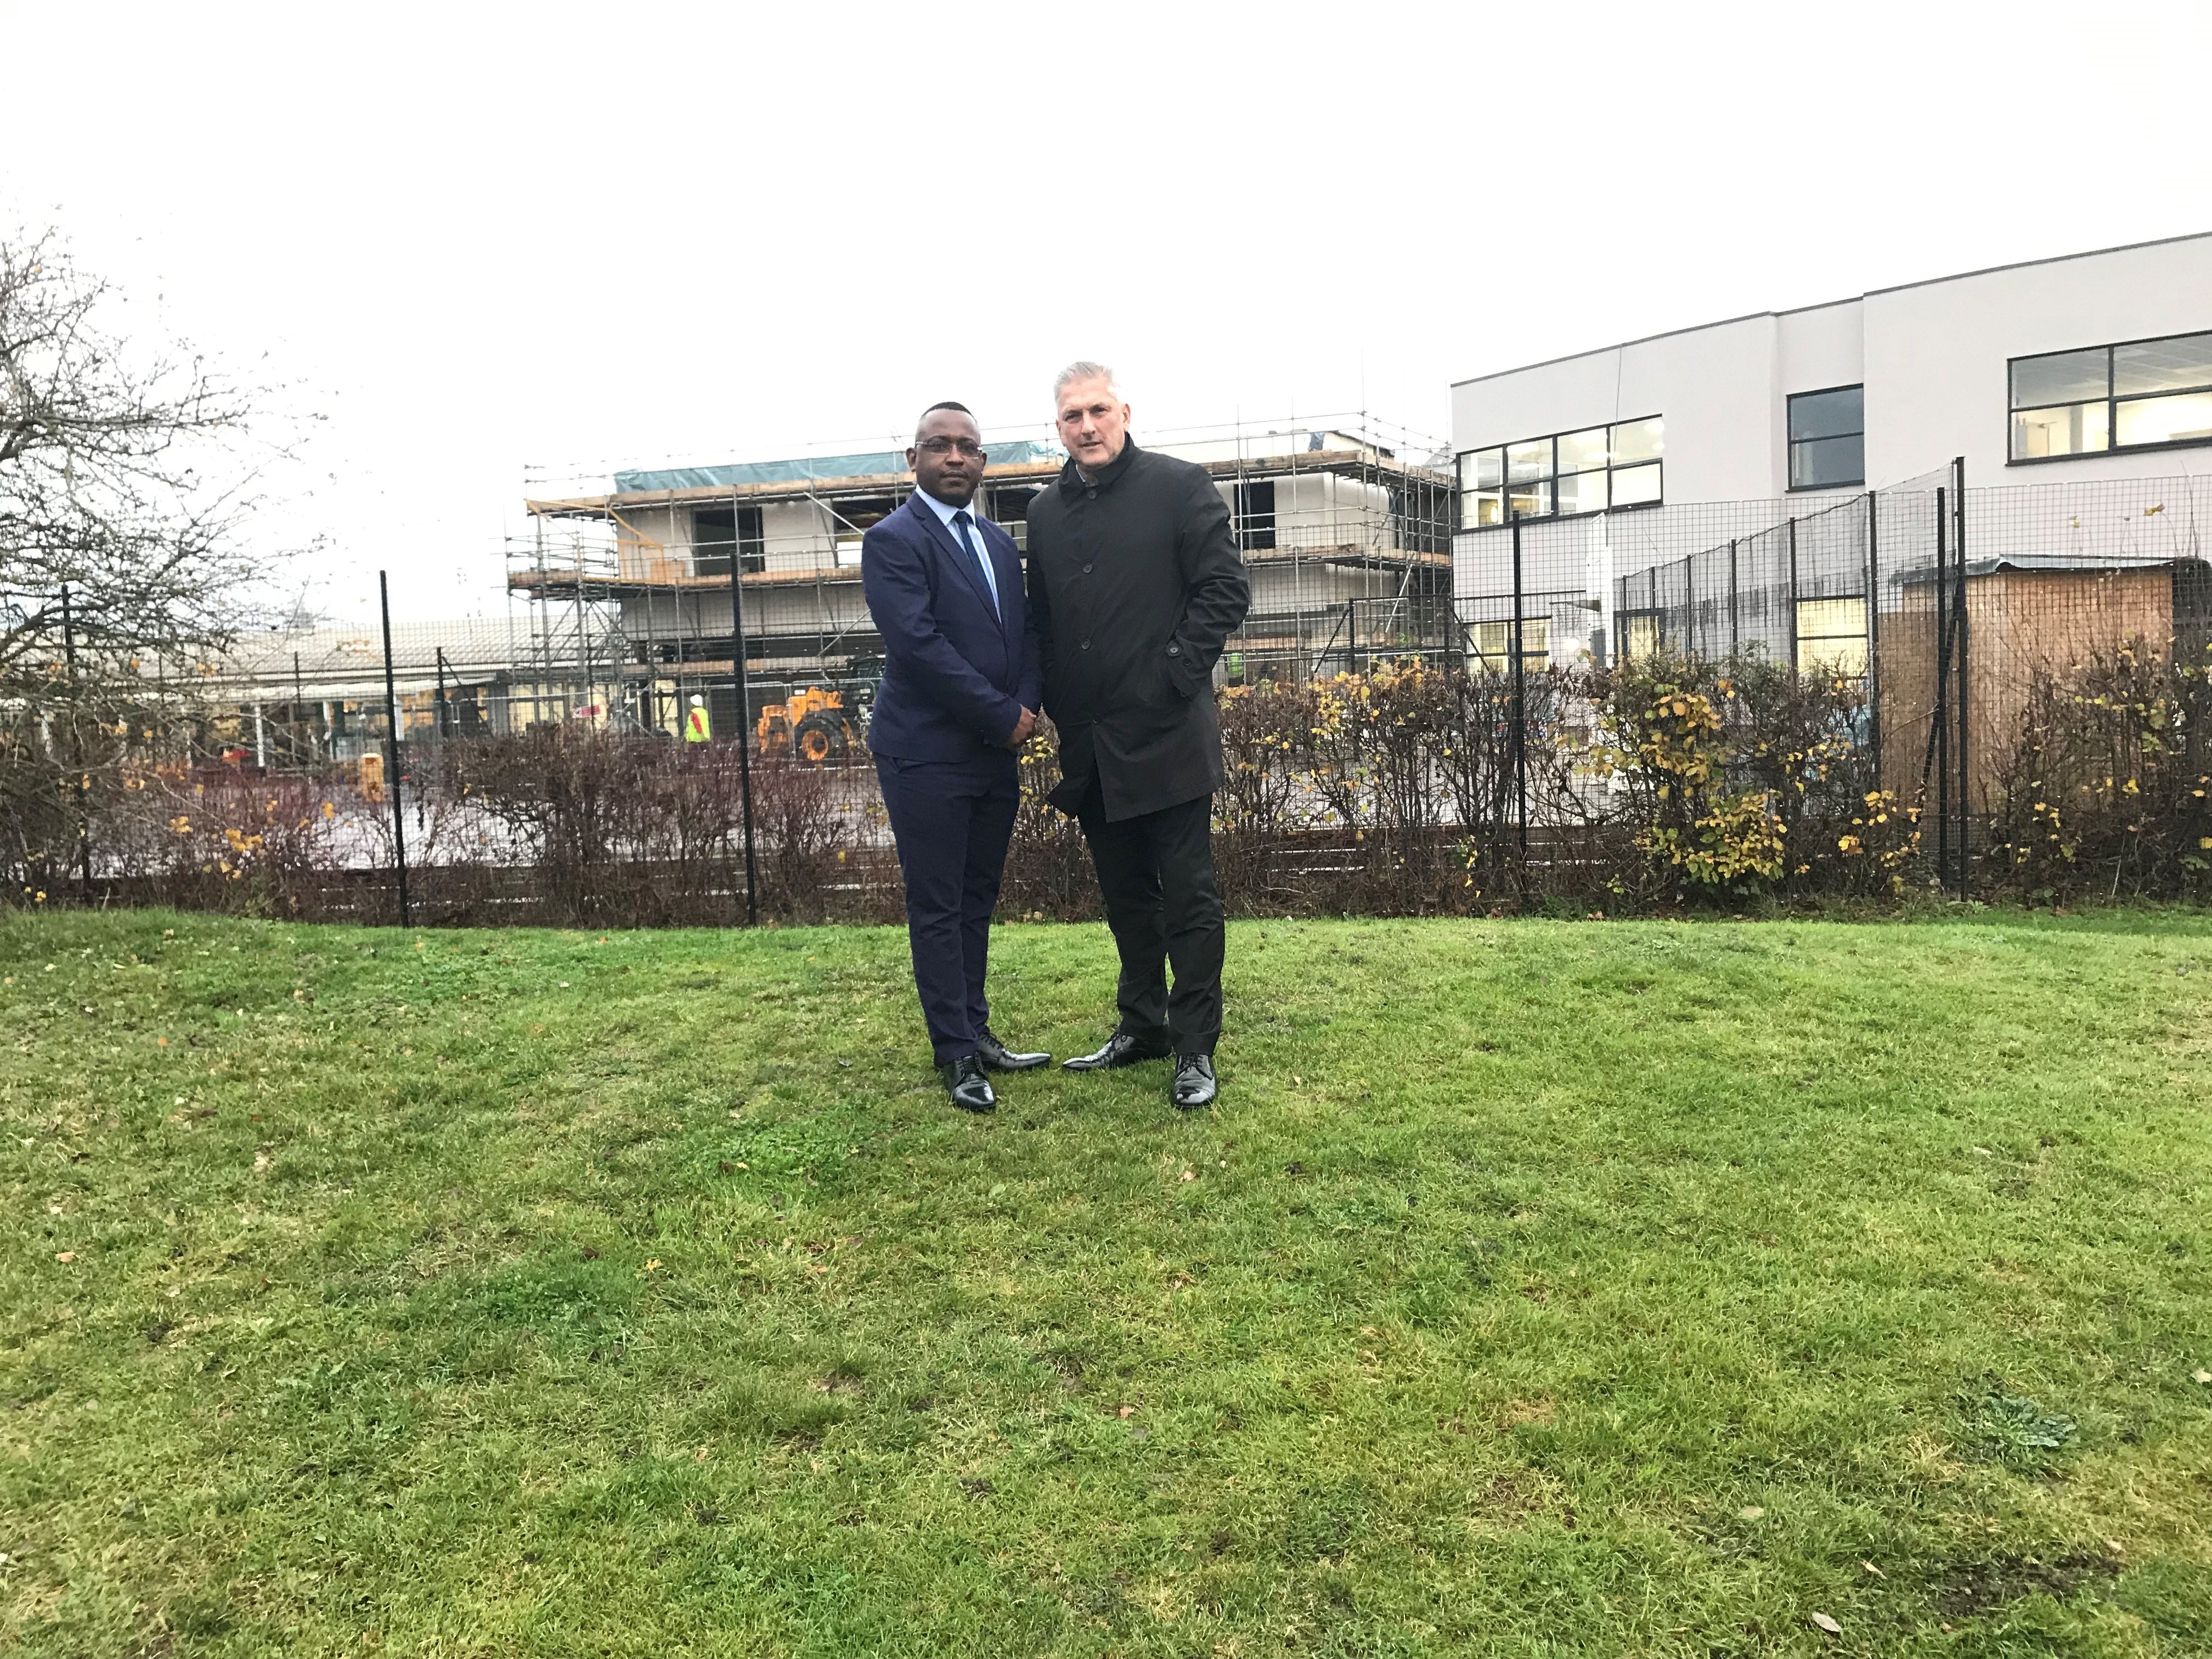 Councillors Mackness and Tejan on the site of the school expansion